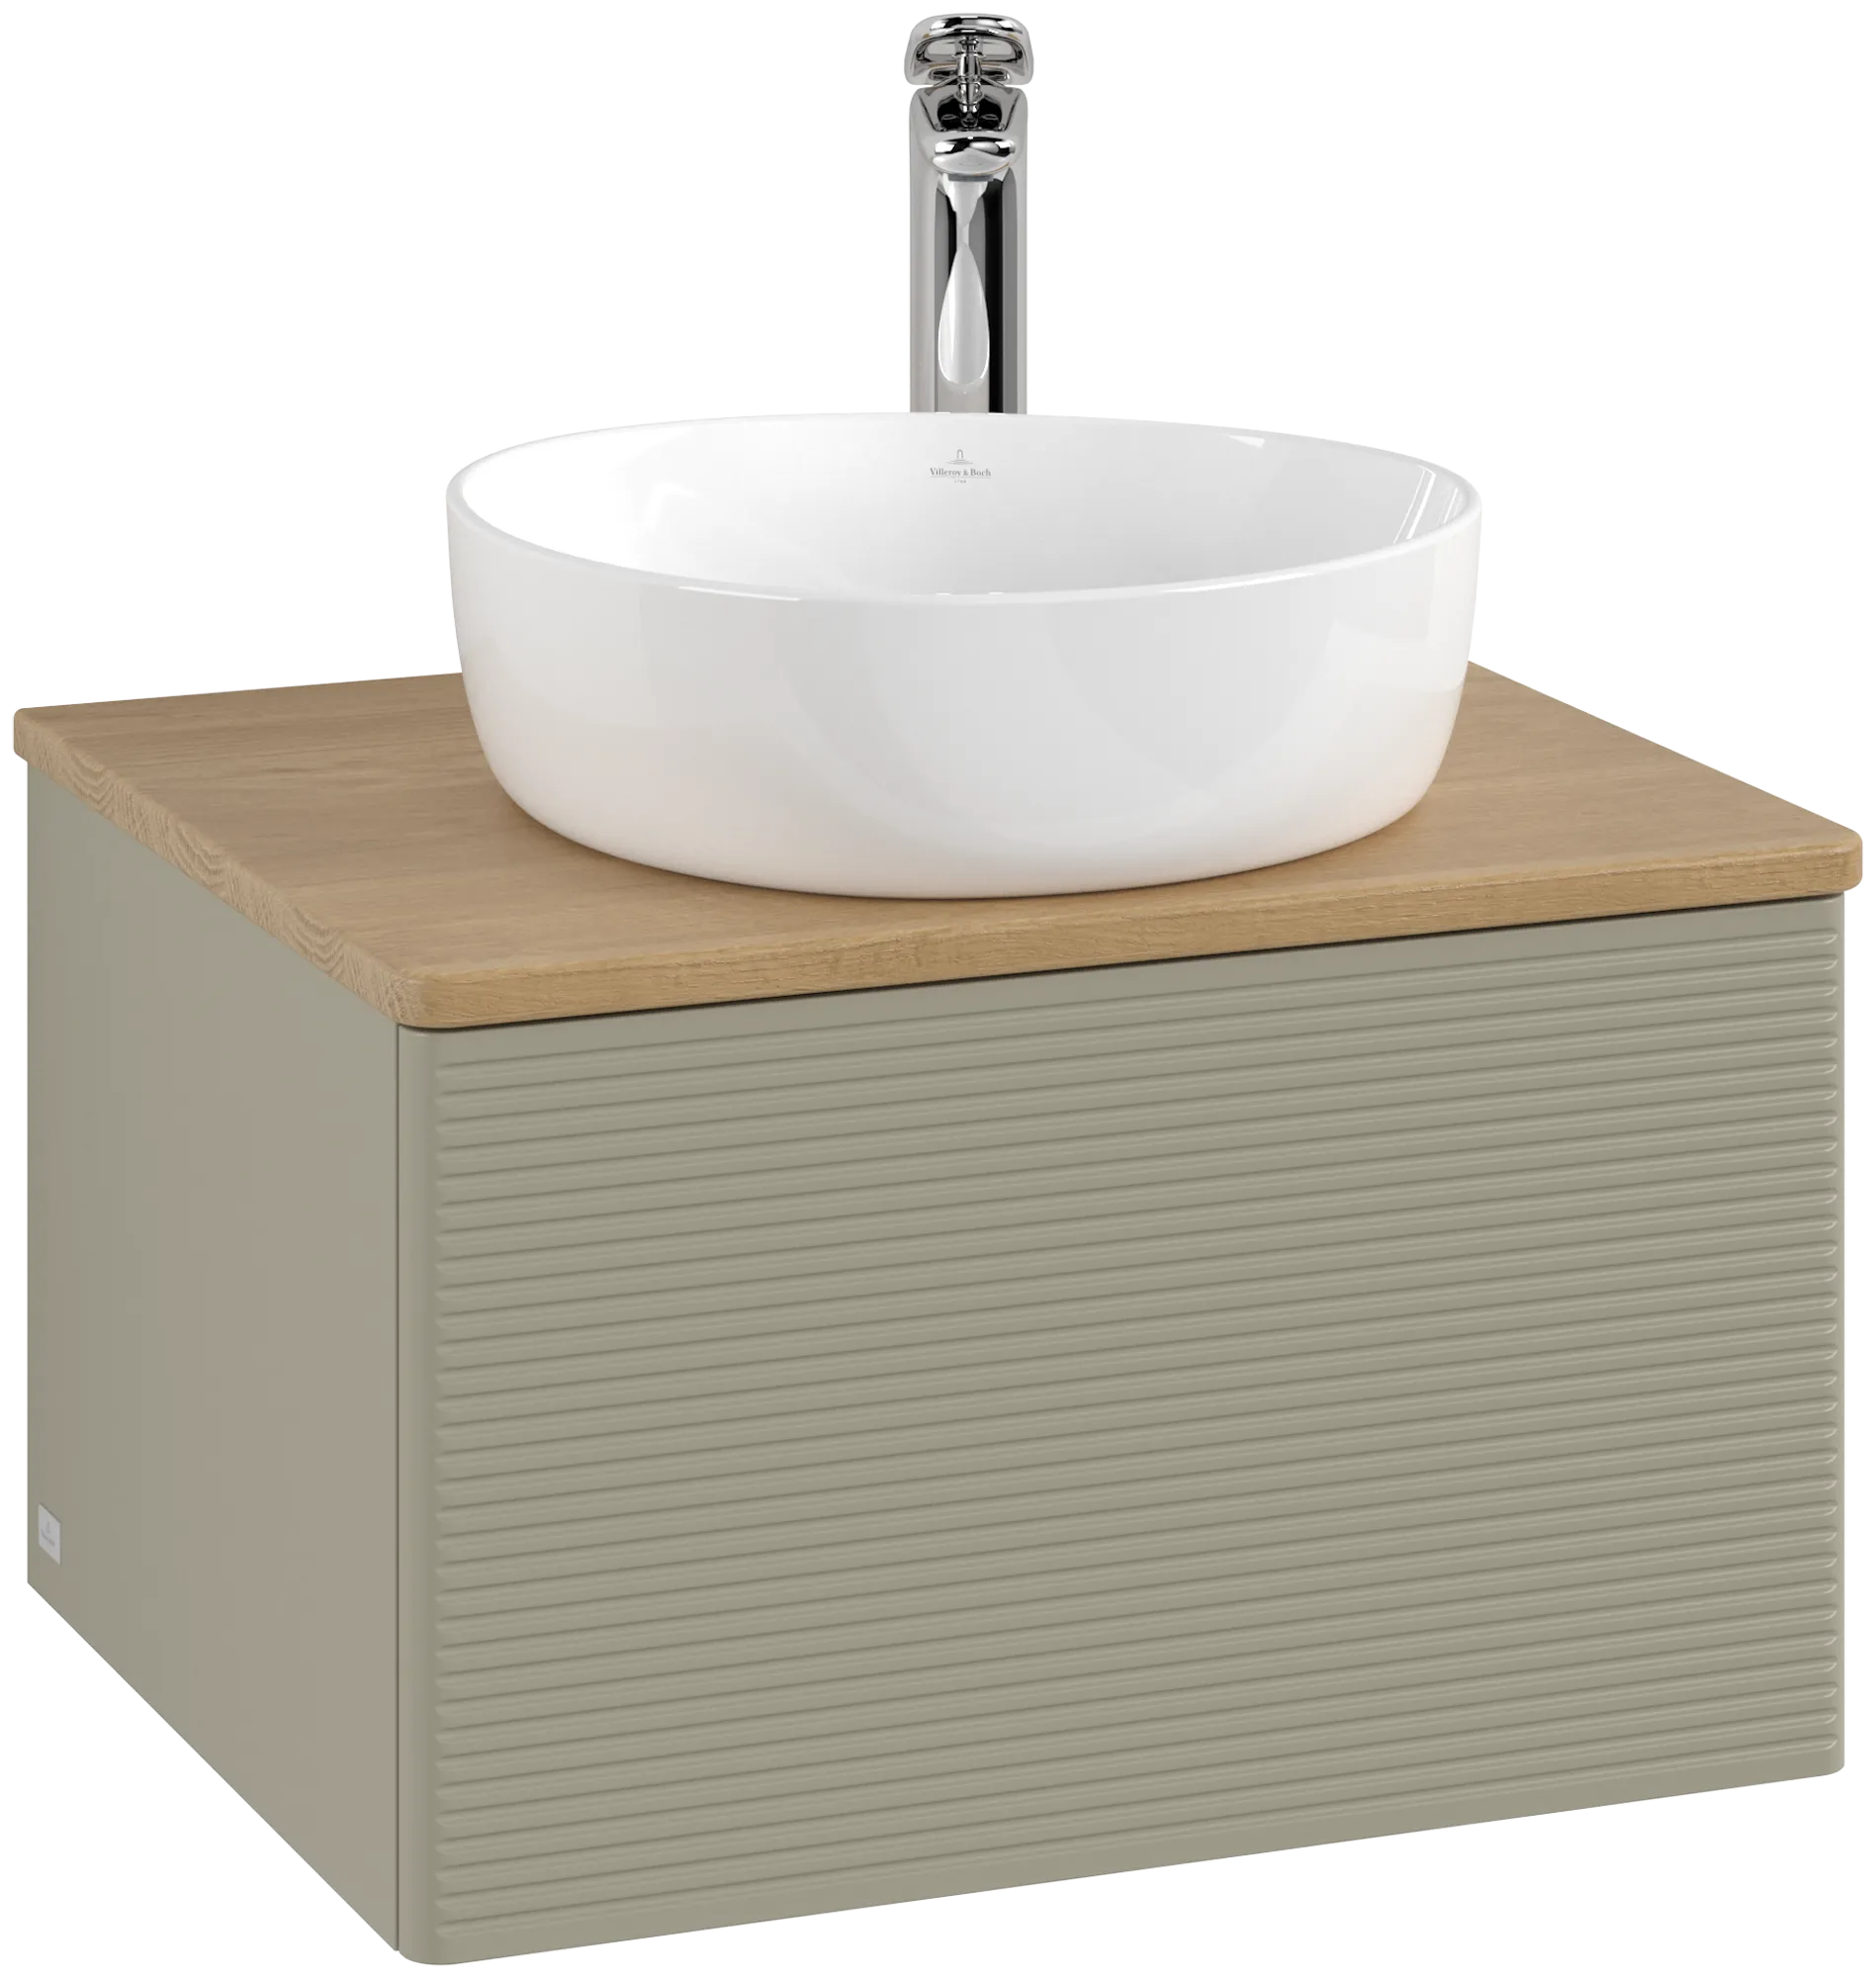 Picture of VILLEROY BOCH Antao Vanity unit, with lighting, 1 pull-out compartment, 600 x 360 x 500 mm, Front with grain texture, Stone Grey Matt Lacquer / Honey Oak #L29151HK